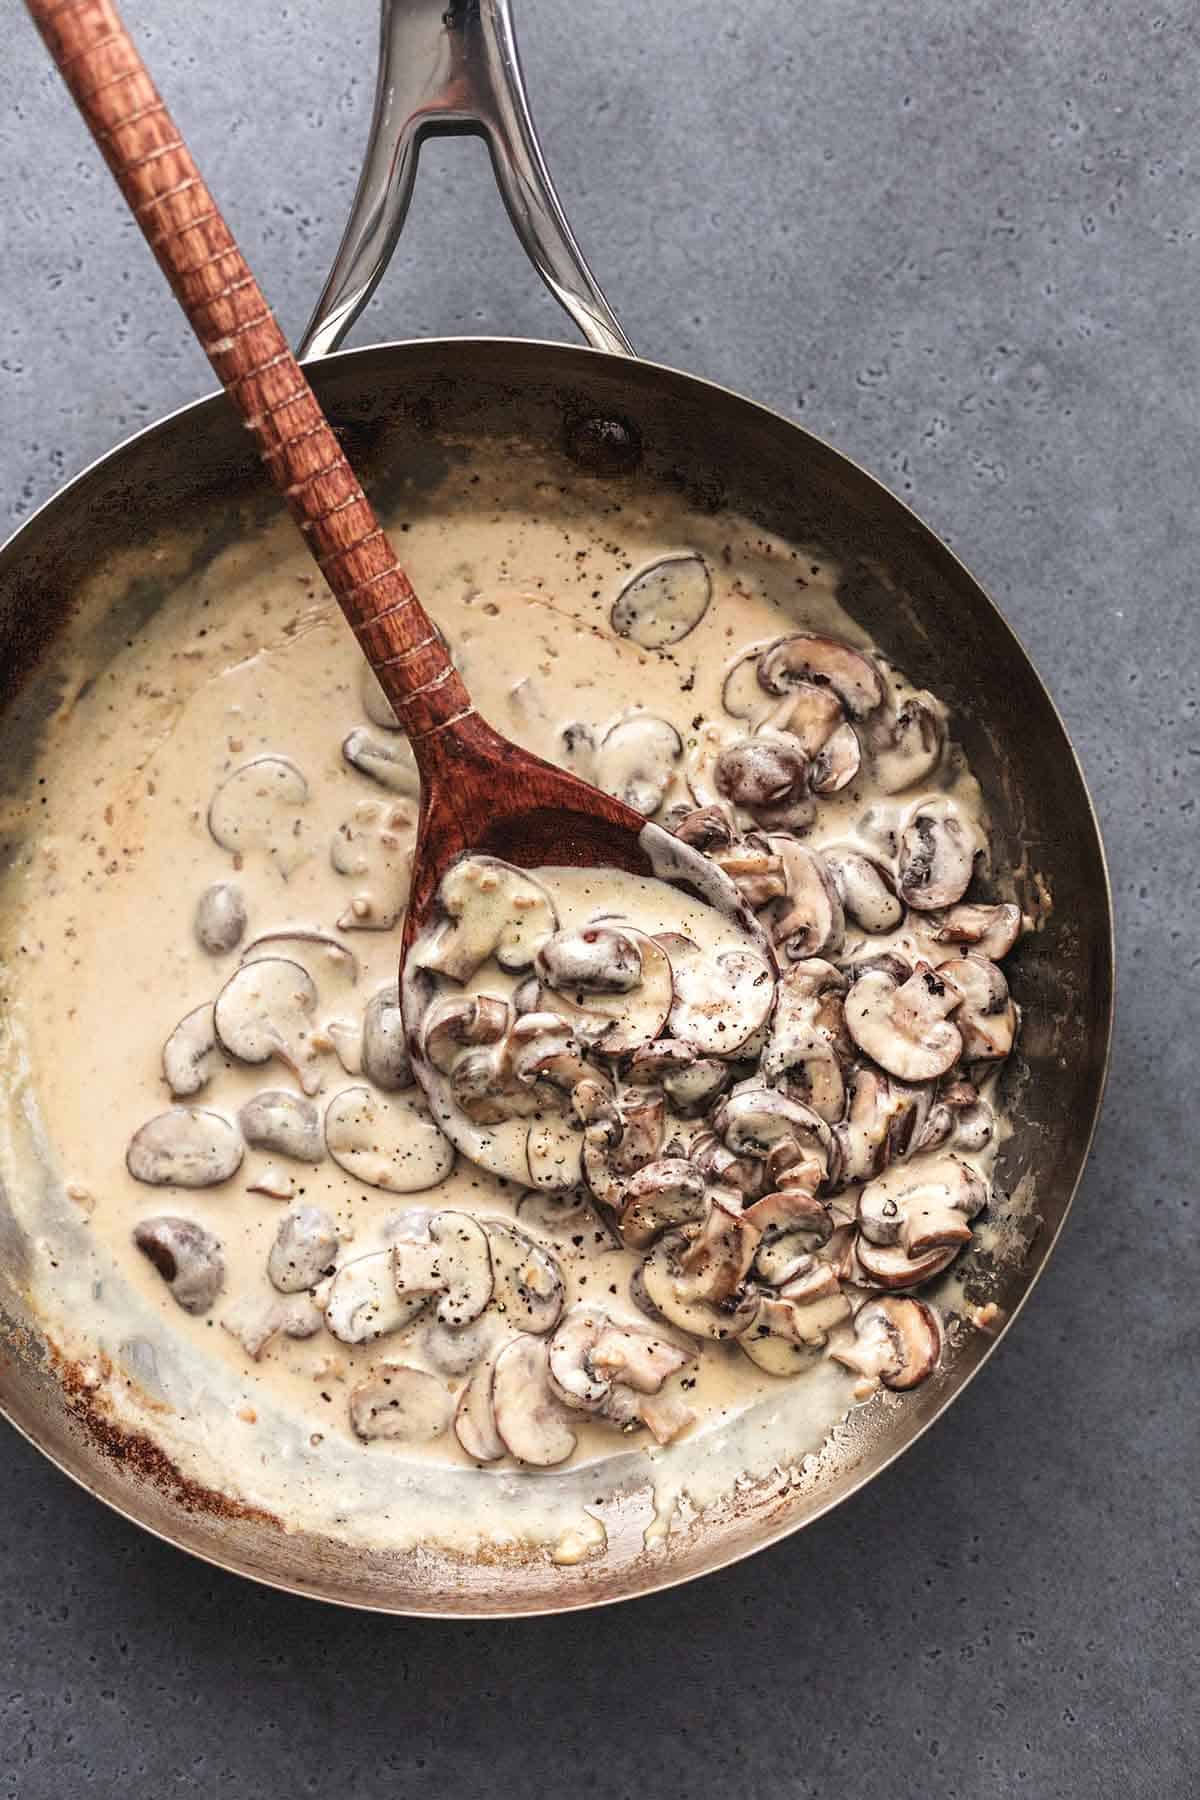 overhead view of stainless steel skillet with creamy sauce and sliced mushrooms with wooden spoon